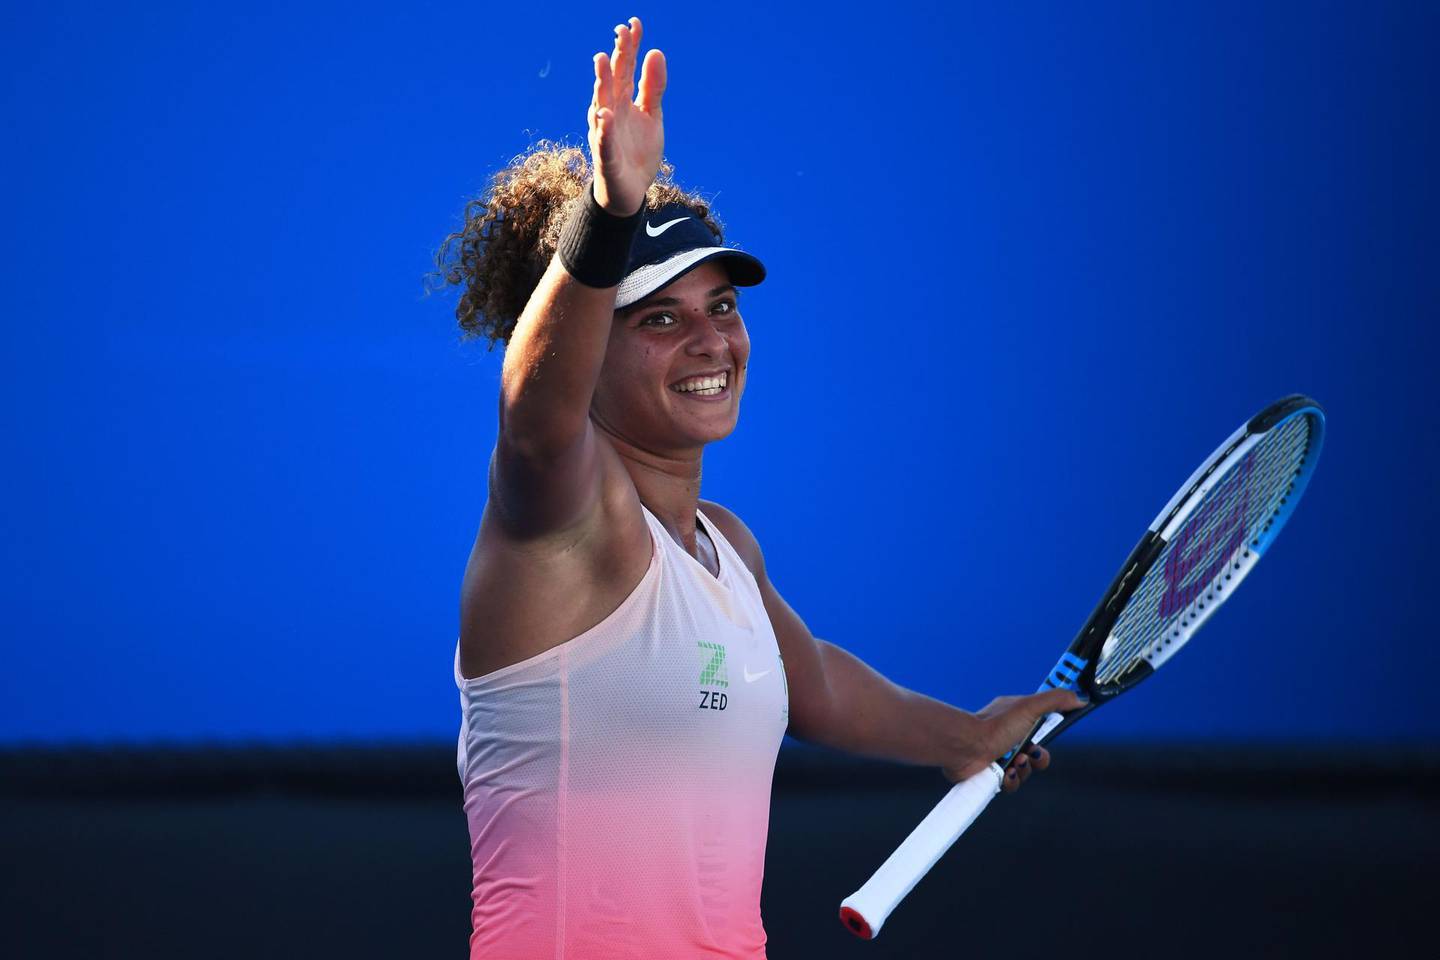 Egypt's Mayar Sherif celebrates beating France's Chloe Paquet in their women's singles match on day two of the Australian Open tennis tournament in Melbourne on February 9, 2021. -- IMAGE RESTRICTED TO EDITORIAL USE - STRICTLY NO COMMERCIAL USE --
 / AFP / William WEST / -- IMAGE RESTRICTED TO EDITORIAL USE - STRICTLY NO COMMERCIAL USE --
